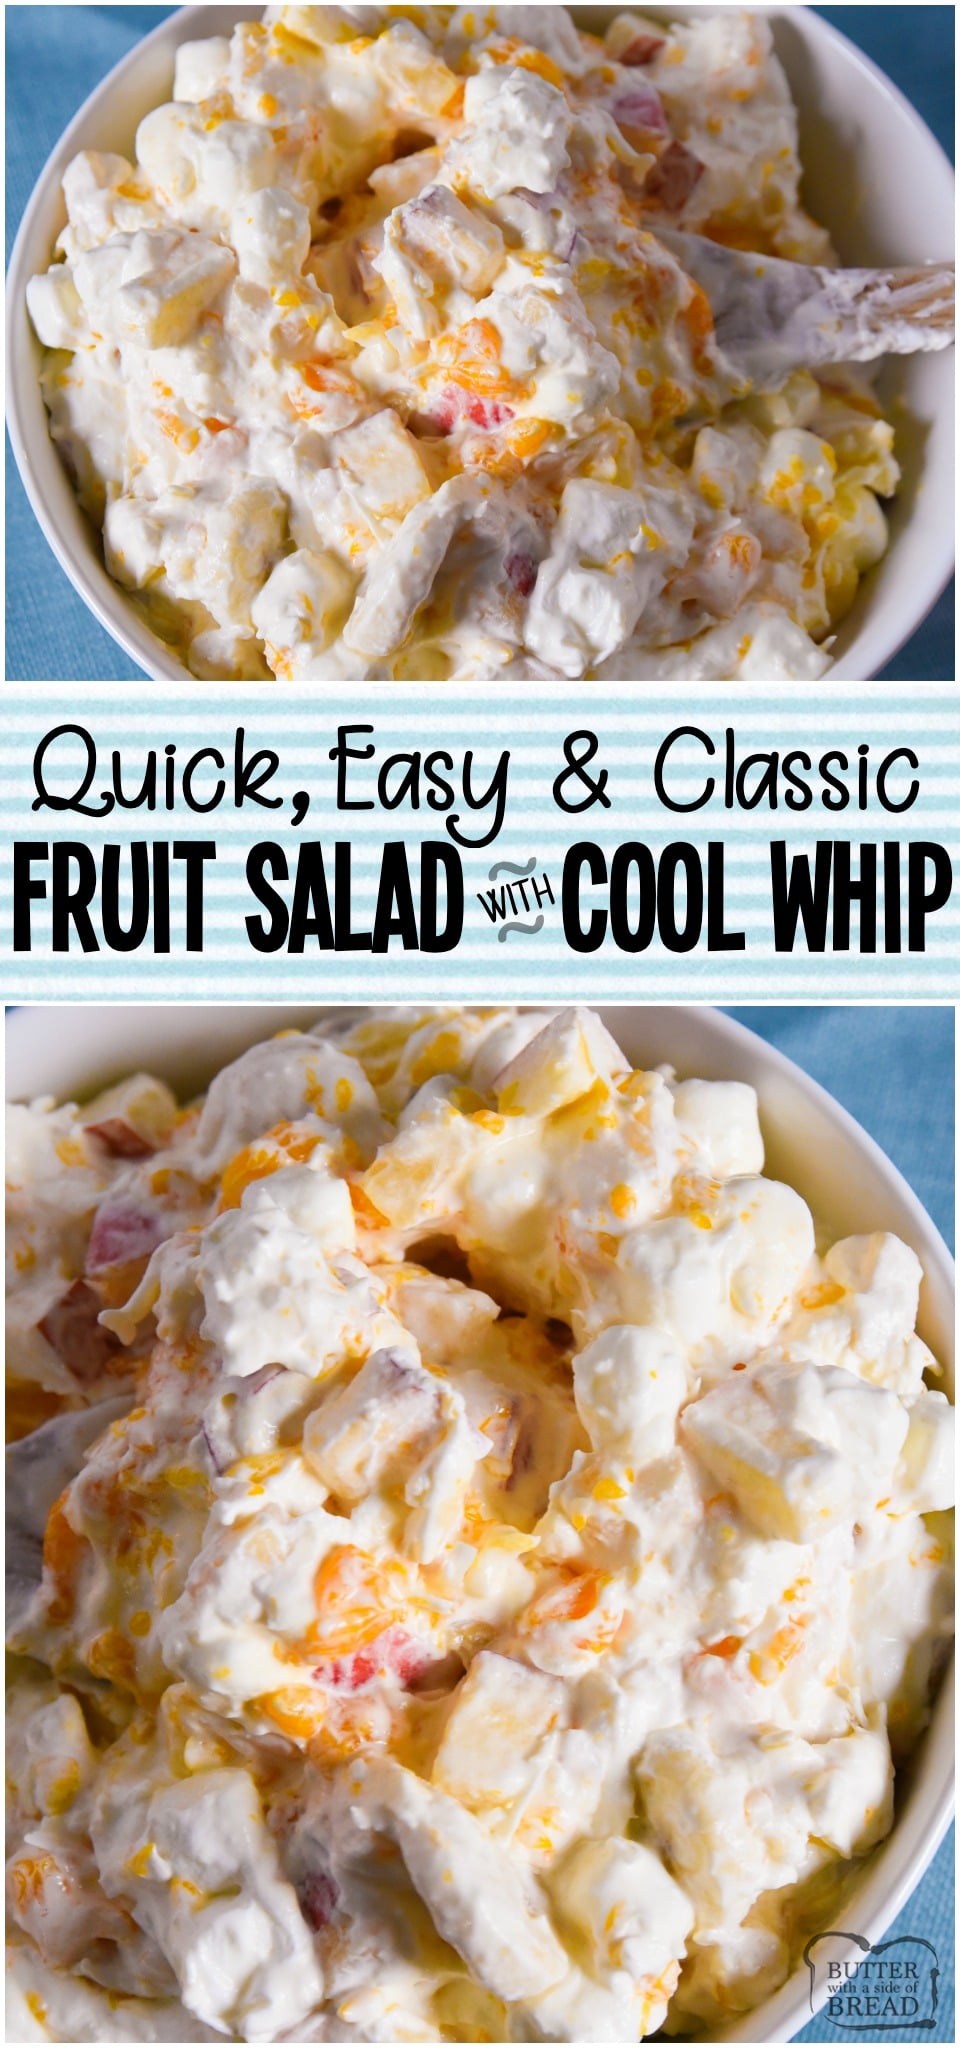 Fruit Salad with Cool Whip made easy in minutes! Classic fruit salad recipe made with ripe fruit and sweet cream. Just like Grandma used to make! #salad #fruit #fruitsalad #CoolWhip #easyrecipe #recipe from BUTTER WITH A SIDE OF BREAD